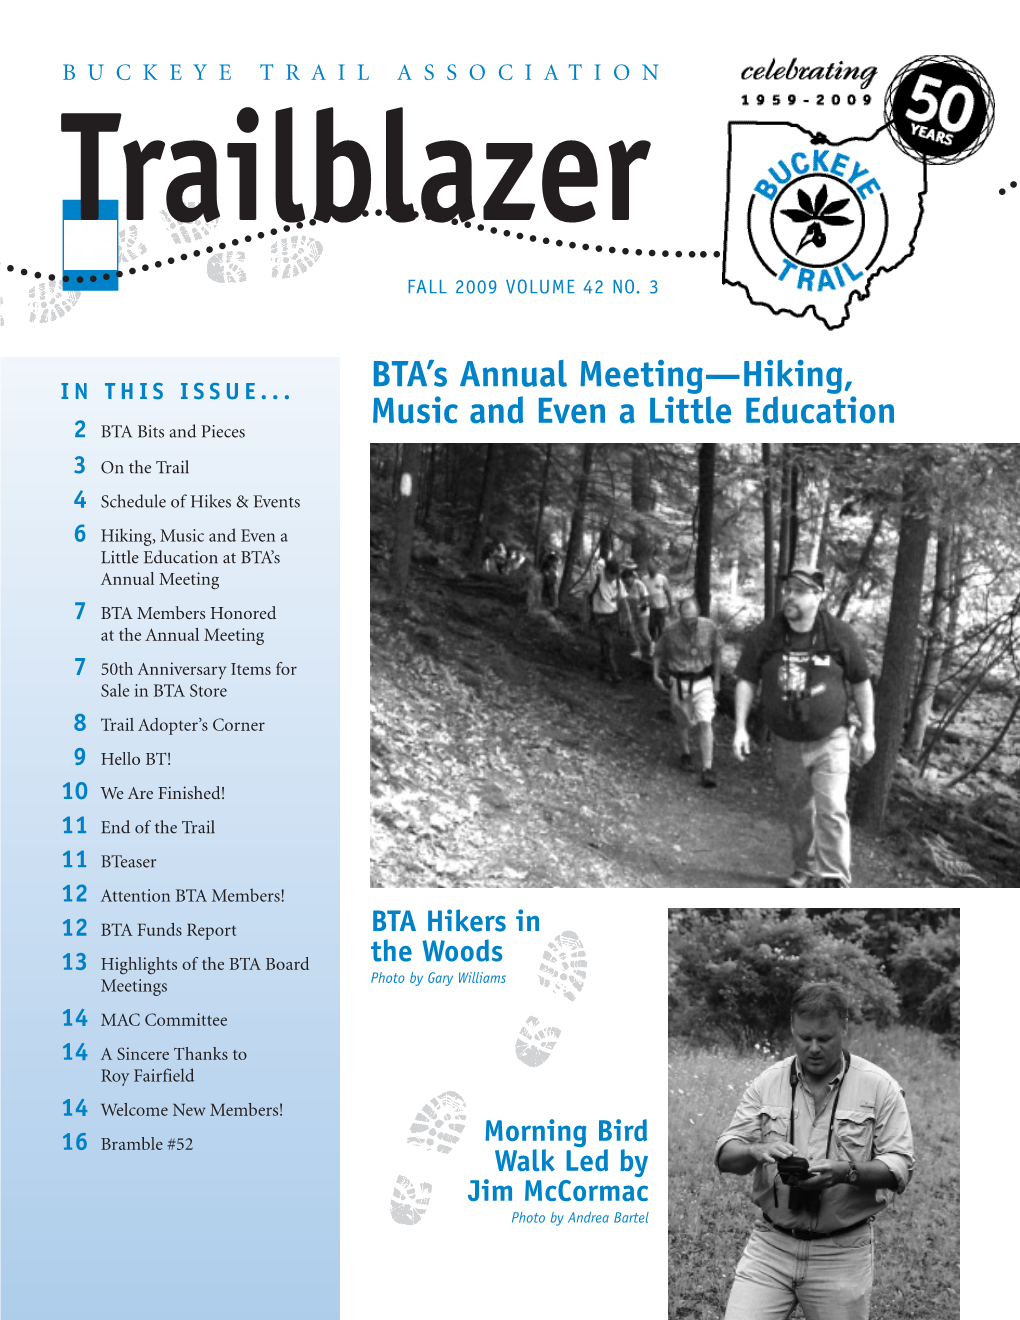 BTA's Annual Meeting—Hiking, Music and Even a Little Education